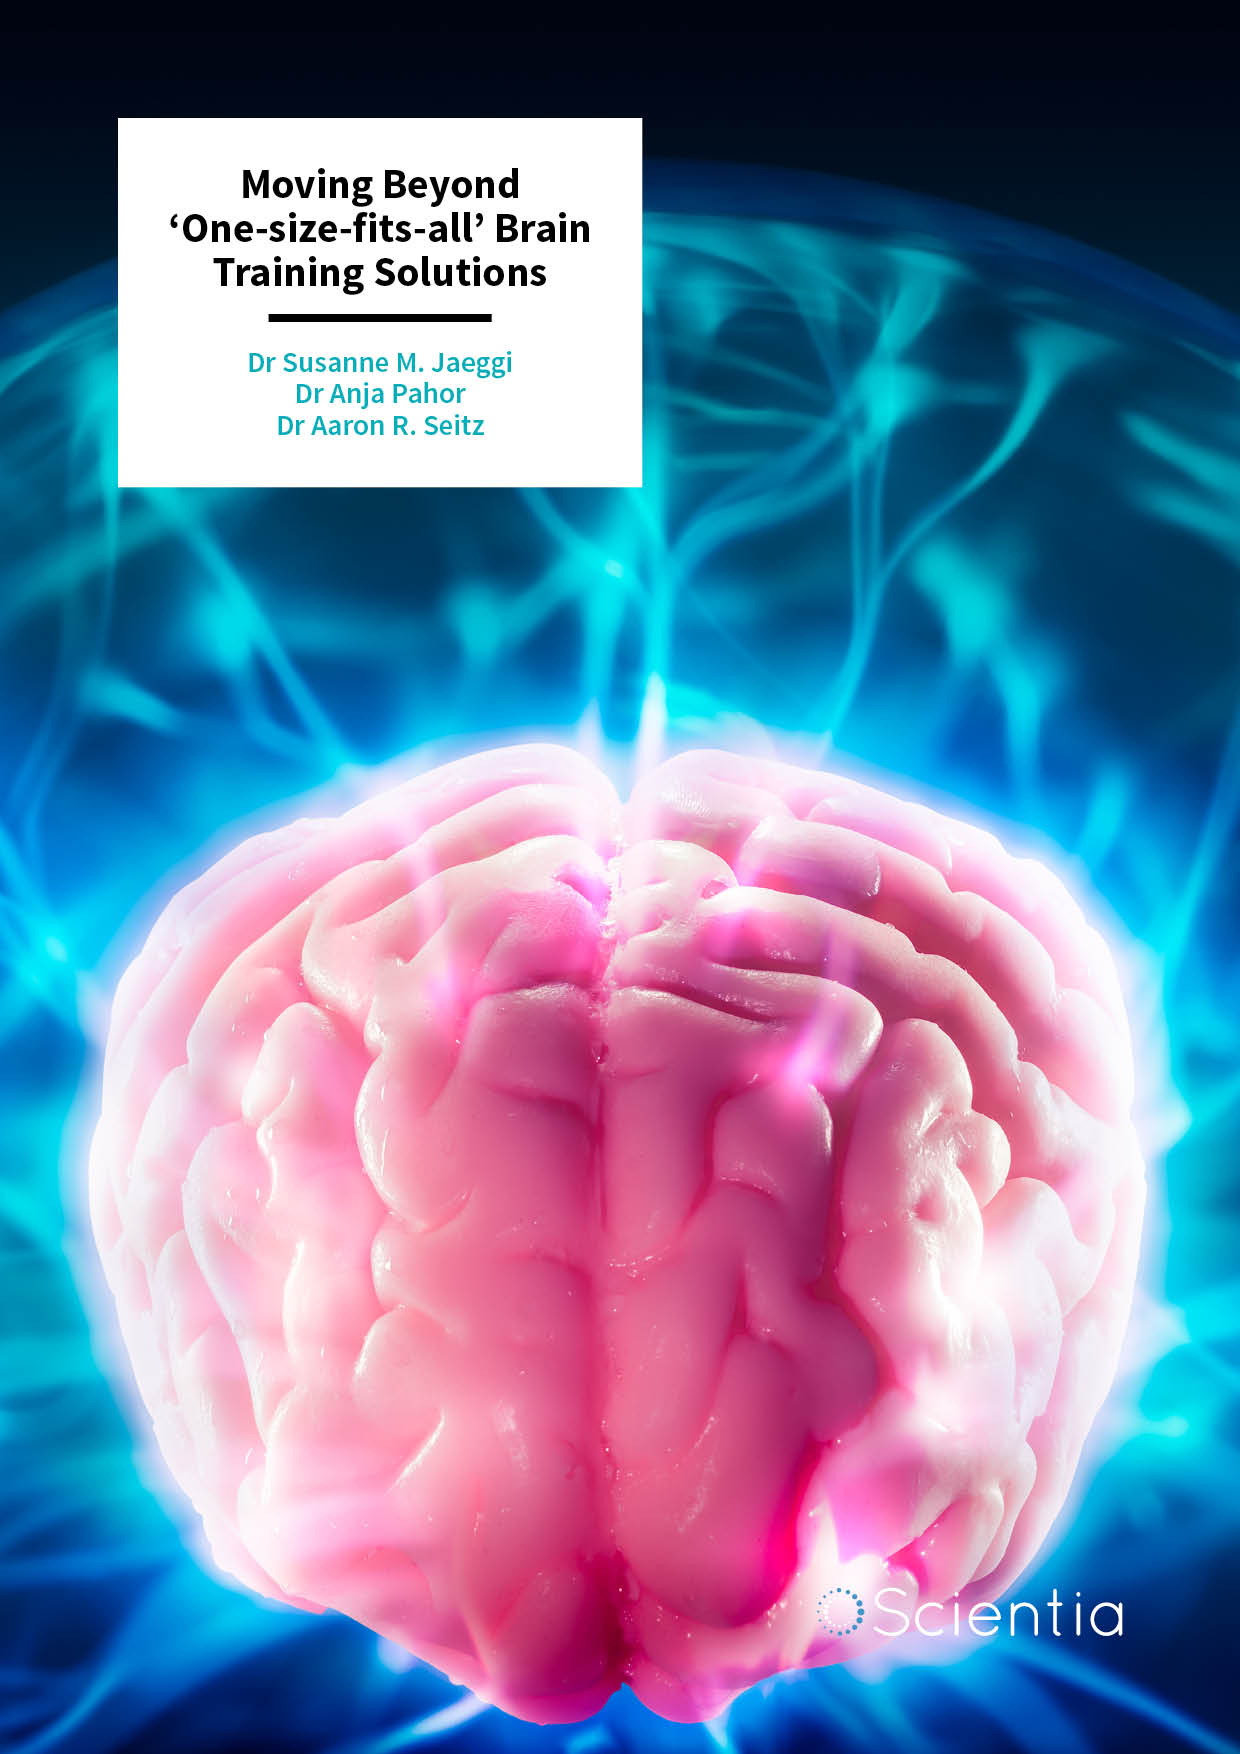 Dr Susanne M. Jaeggi, Dr Anja Pahor and Dr Aaron R. Seitz – Moving Beyond ‘One-size-fits-all’ Brain Training Solutions